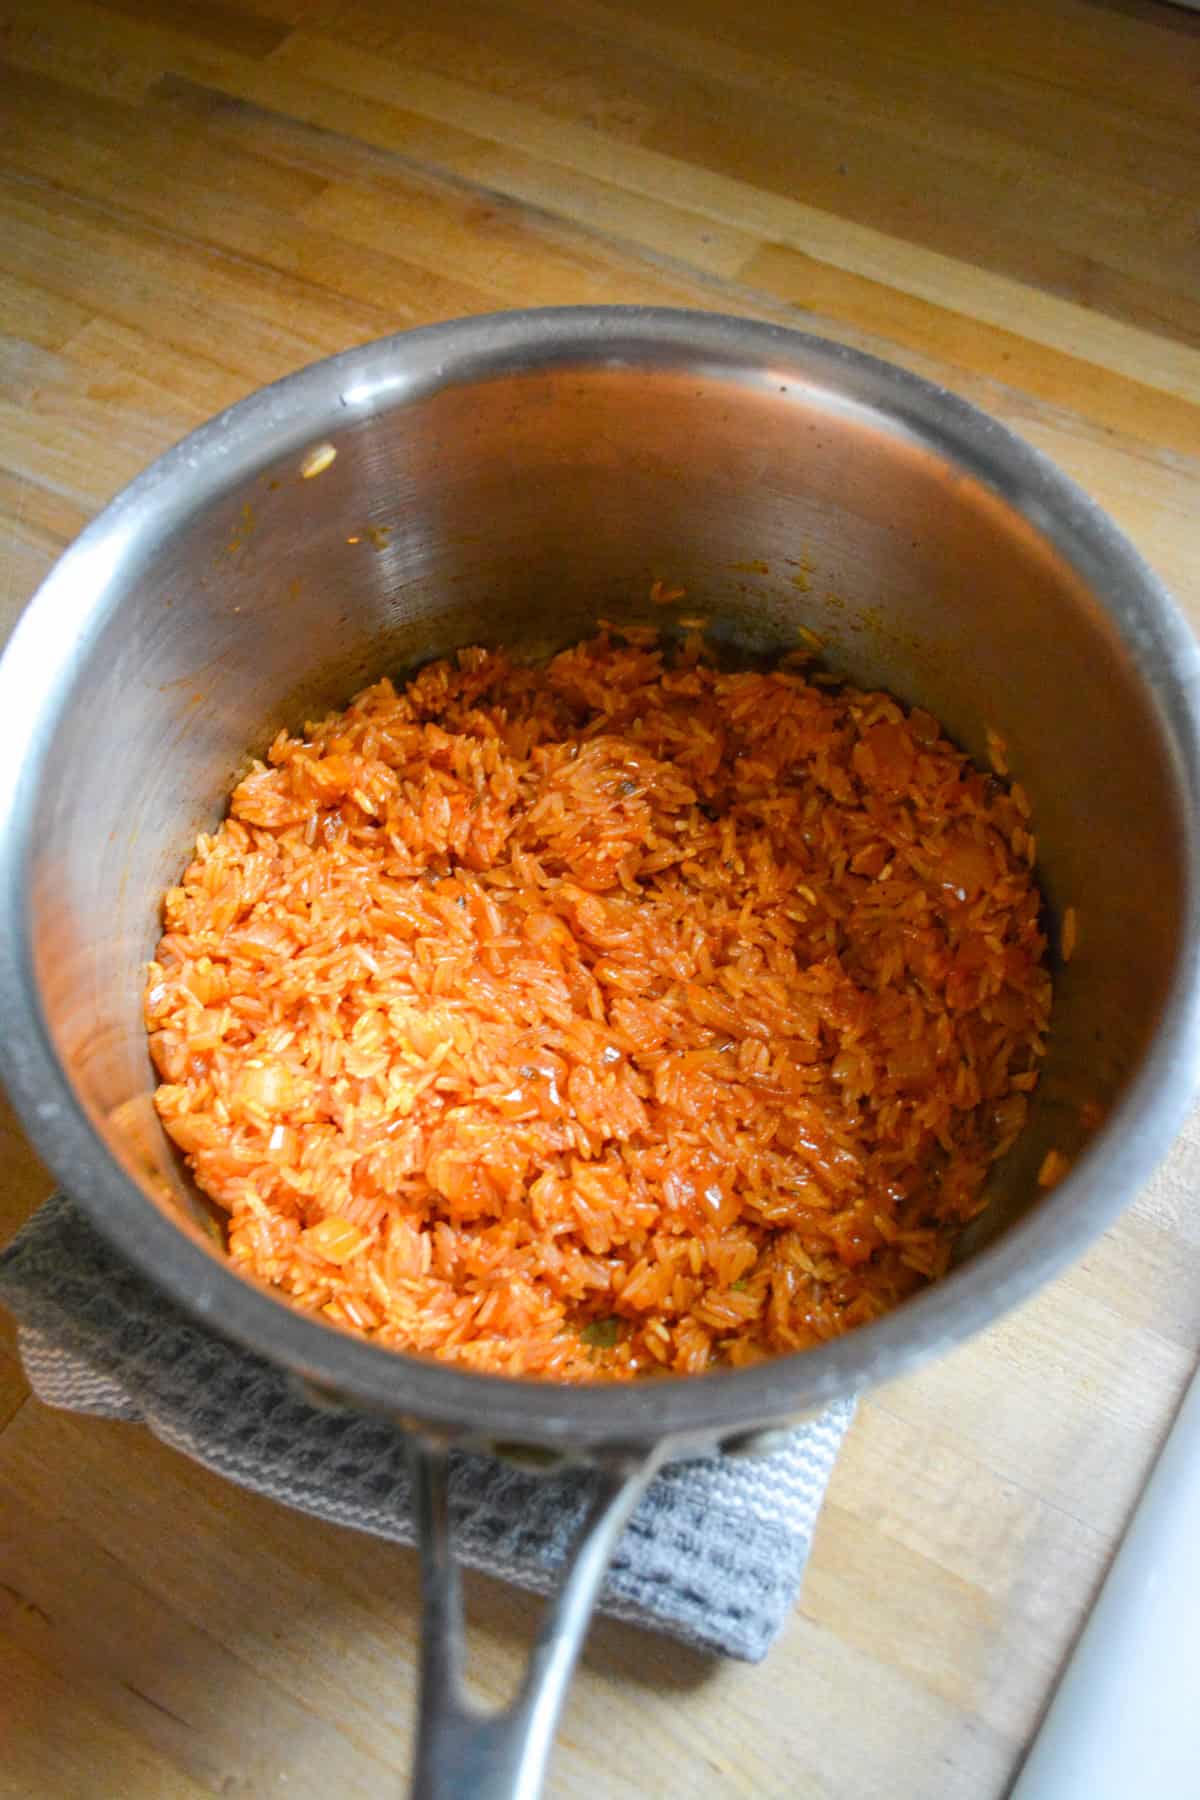 Toasting the rice in a sauce pan.